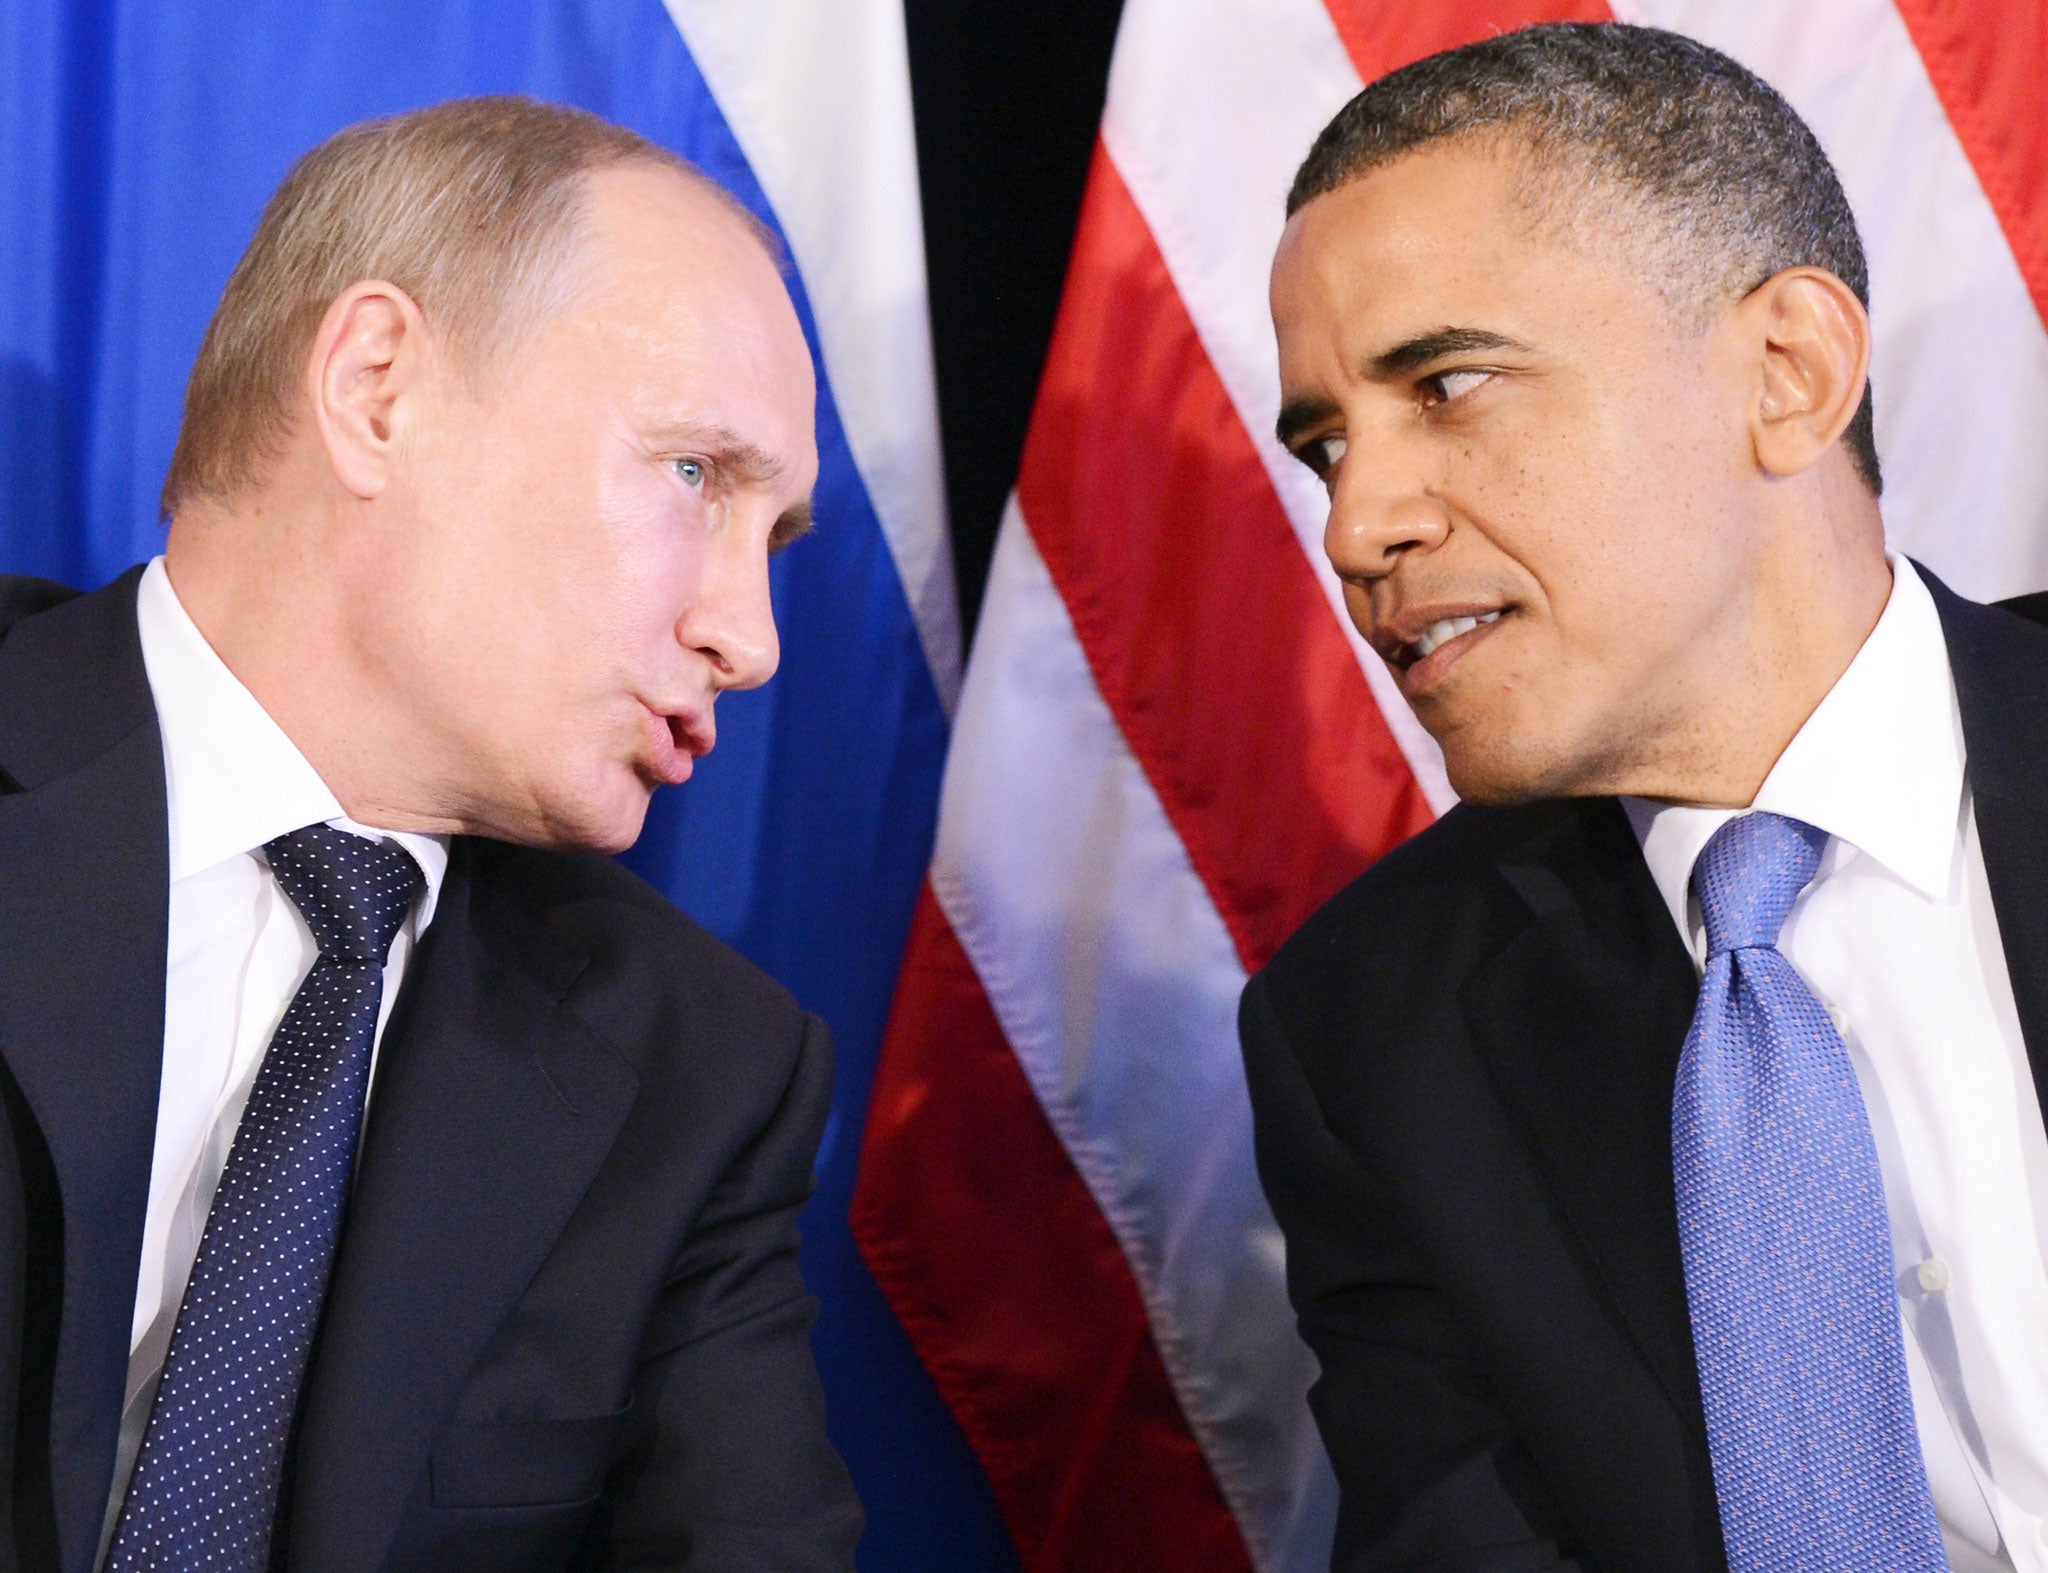 Barack Obama (right) and Vladimir Putin (left) at the G20 Summit in Los Cabos, Mexico in 2012